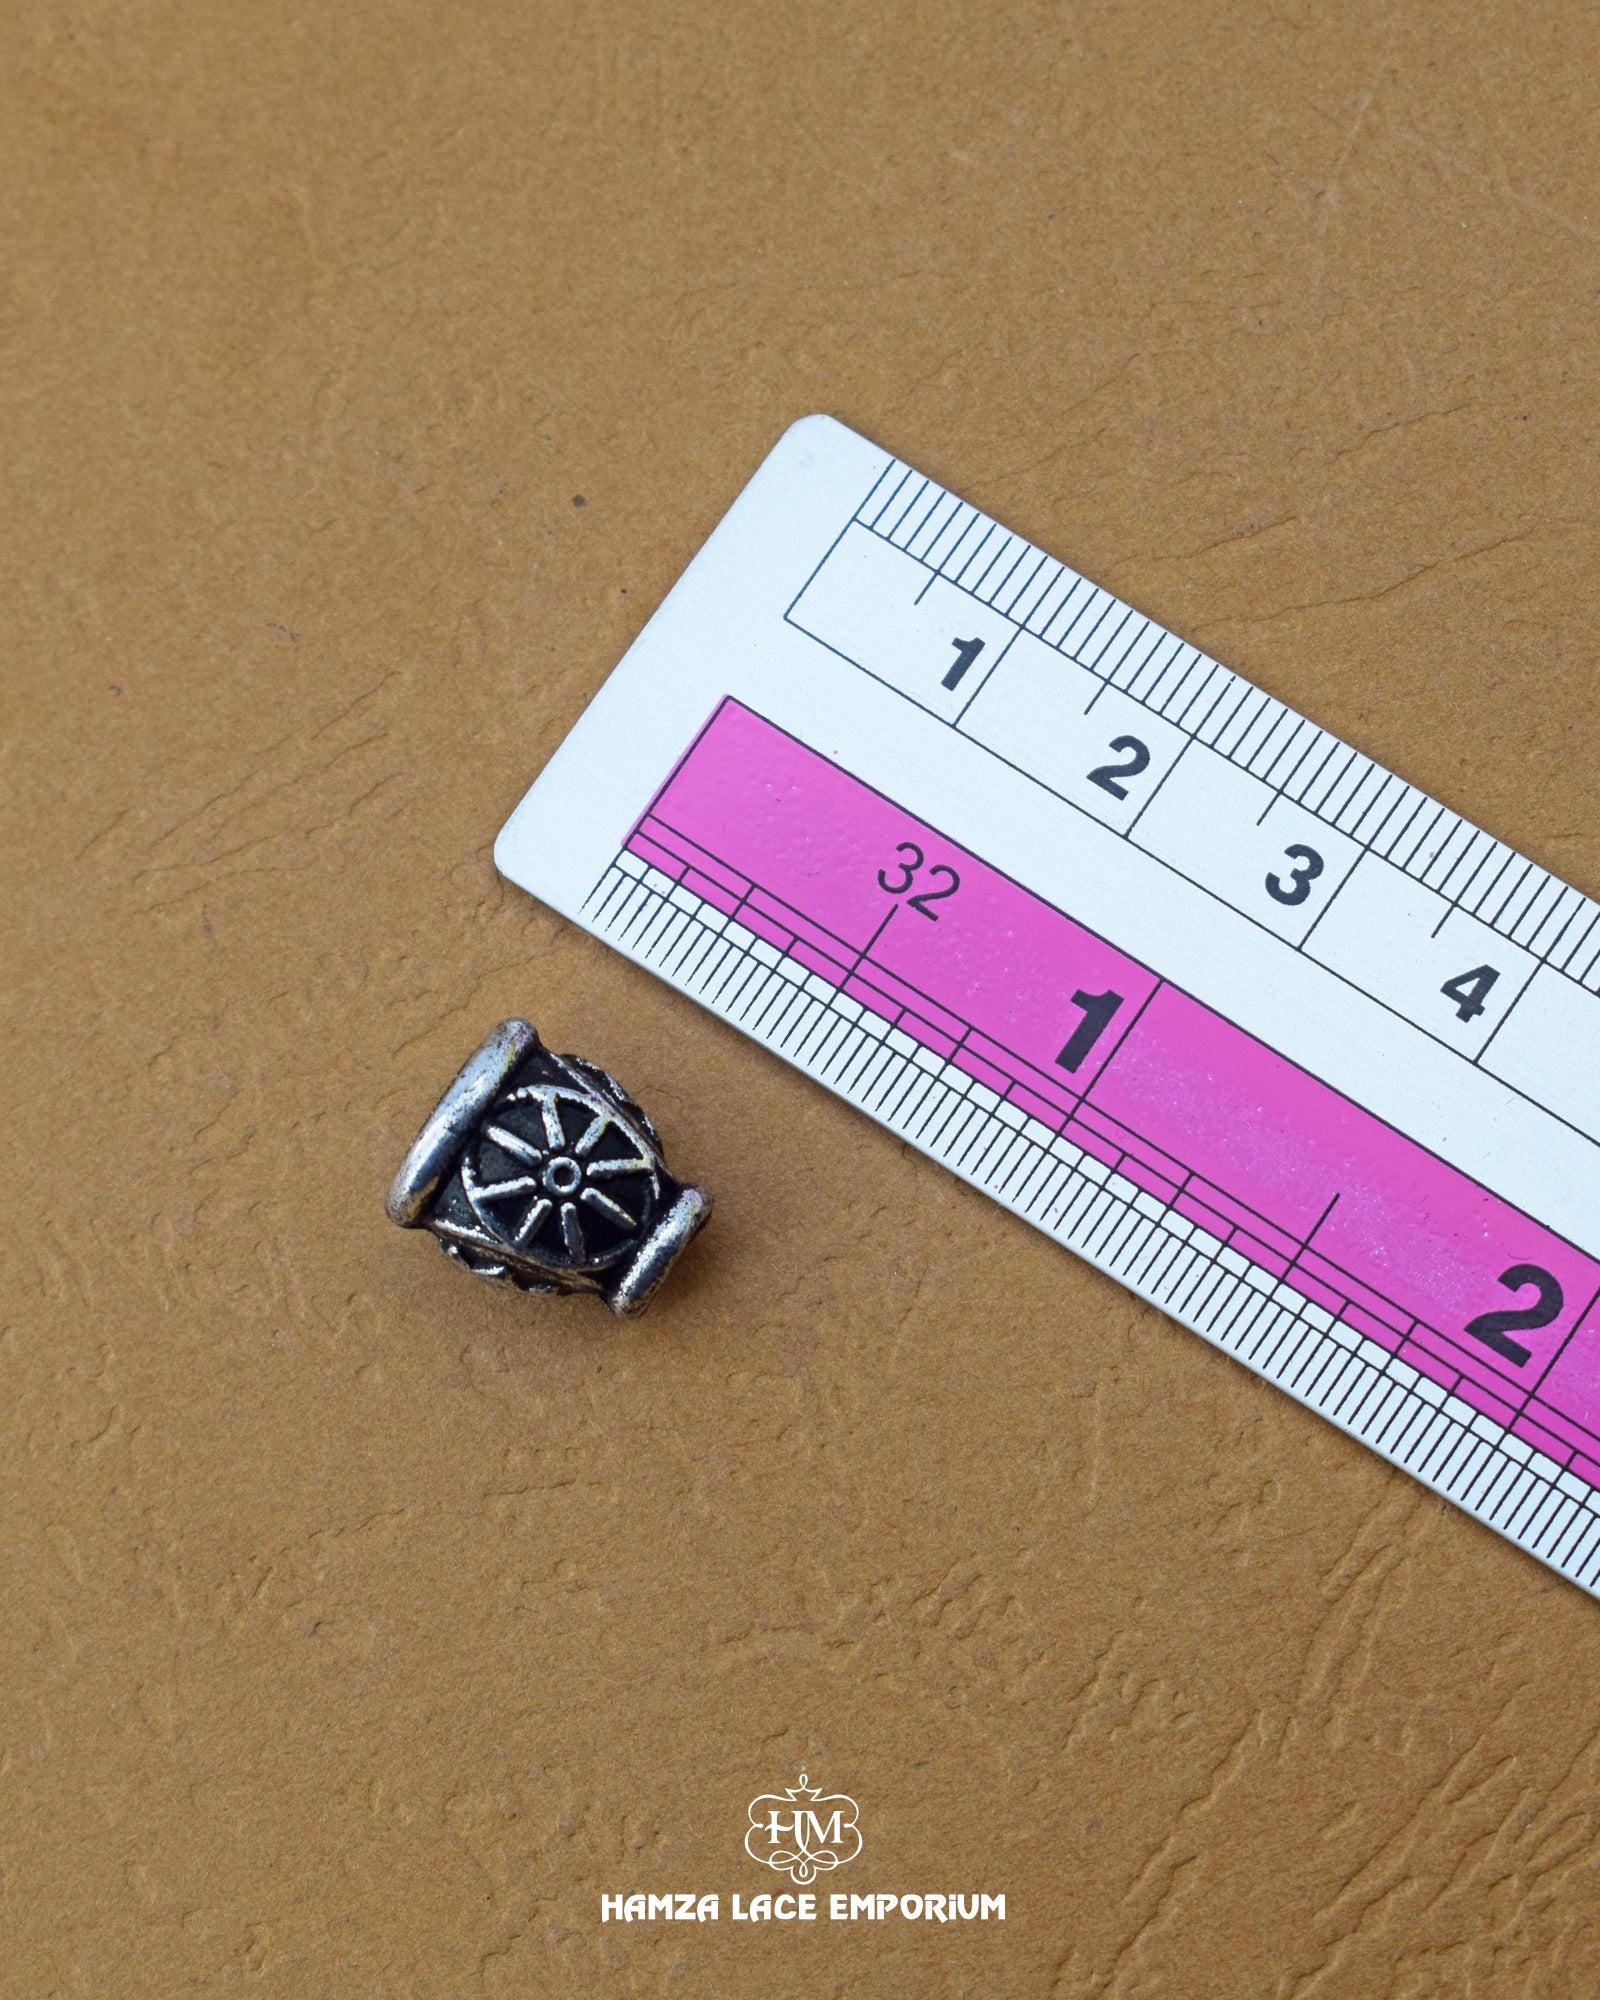 The size of the Beautifully designed 'Hanging Button MA387' is measured by using a ruler